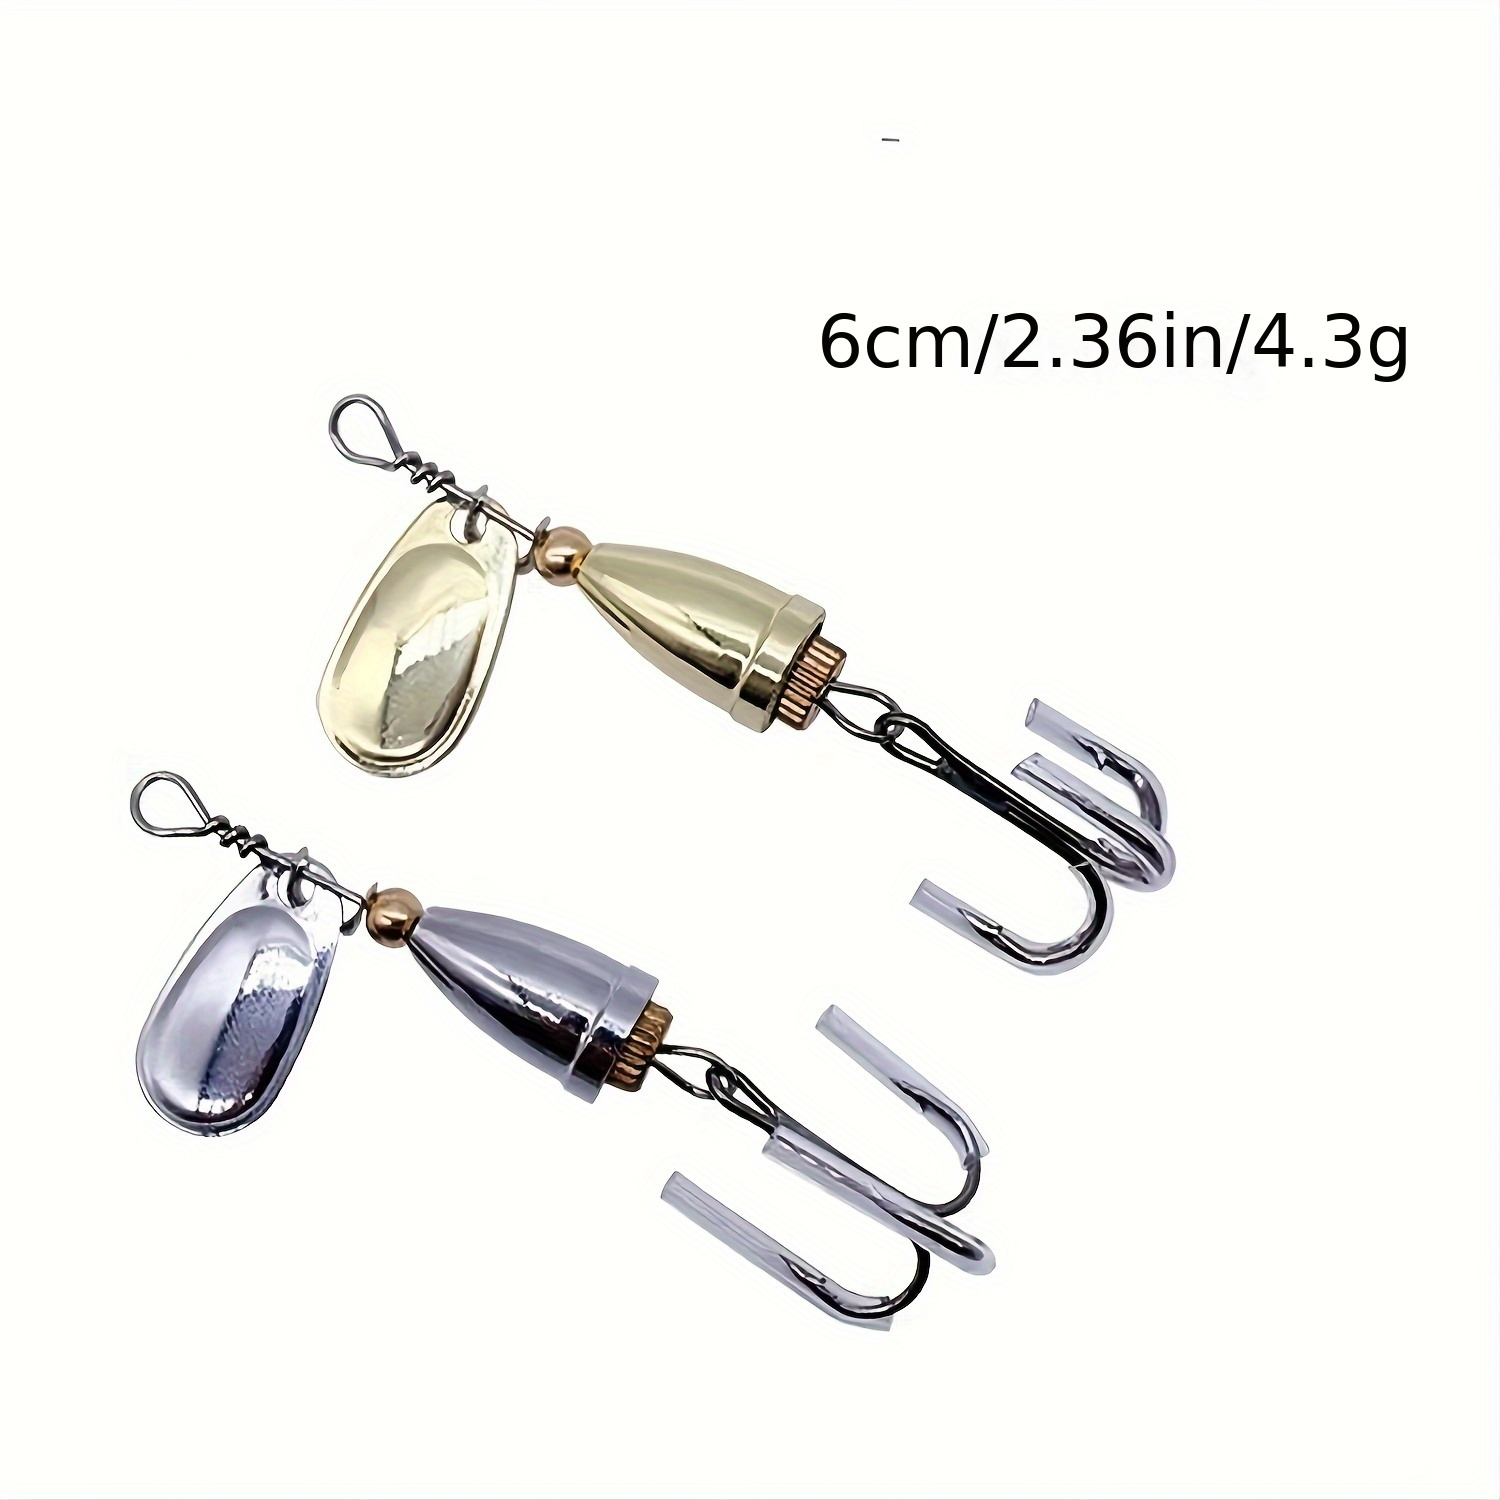 Long Casting Fishing Lure, Bionic Bait, Spinnerbait With Barbed